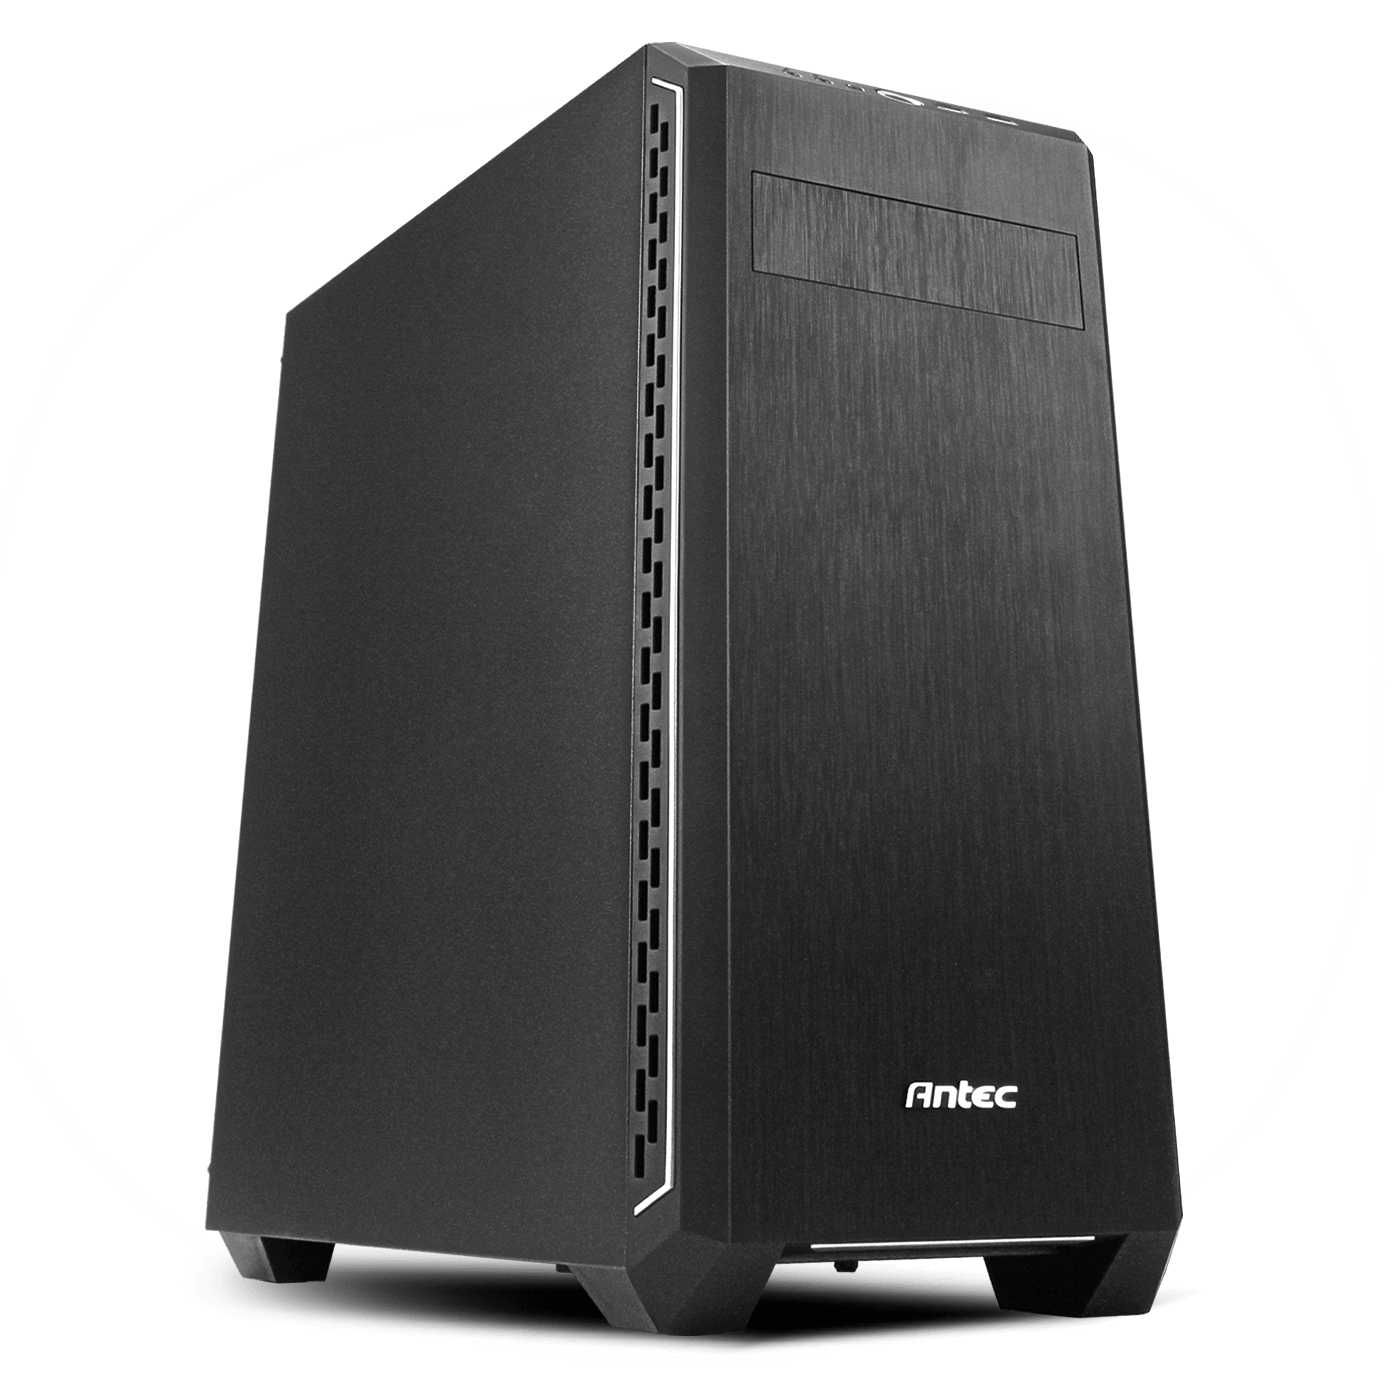 P7 SILENT is the Best Silent PC Mid Tower Case with ATX/2 x 120mm 